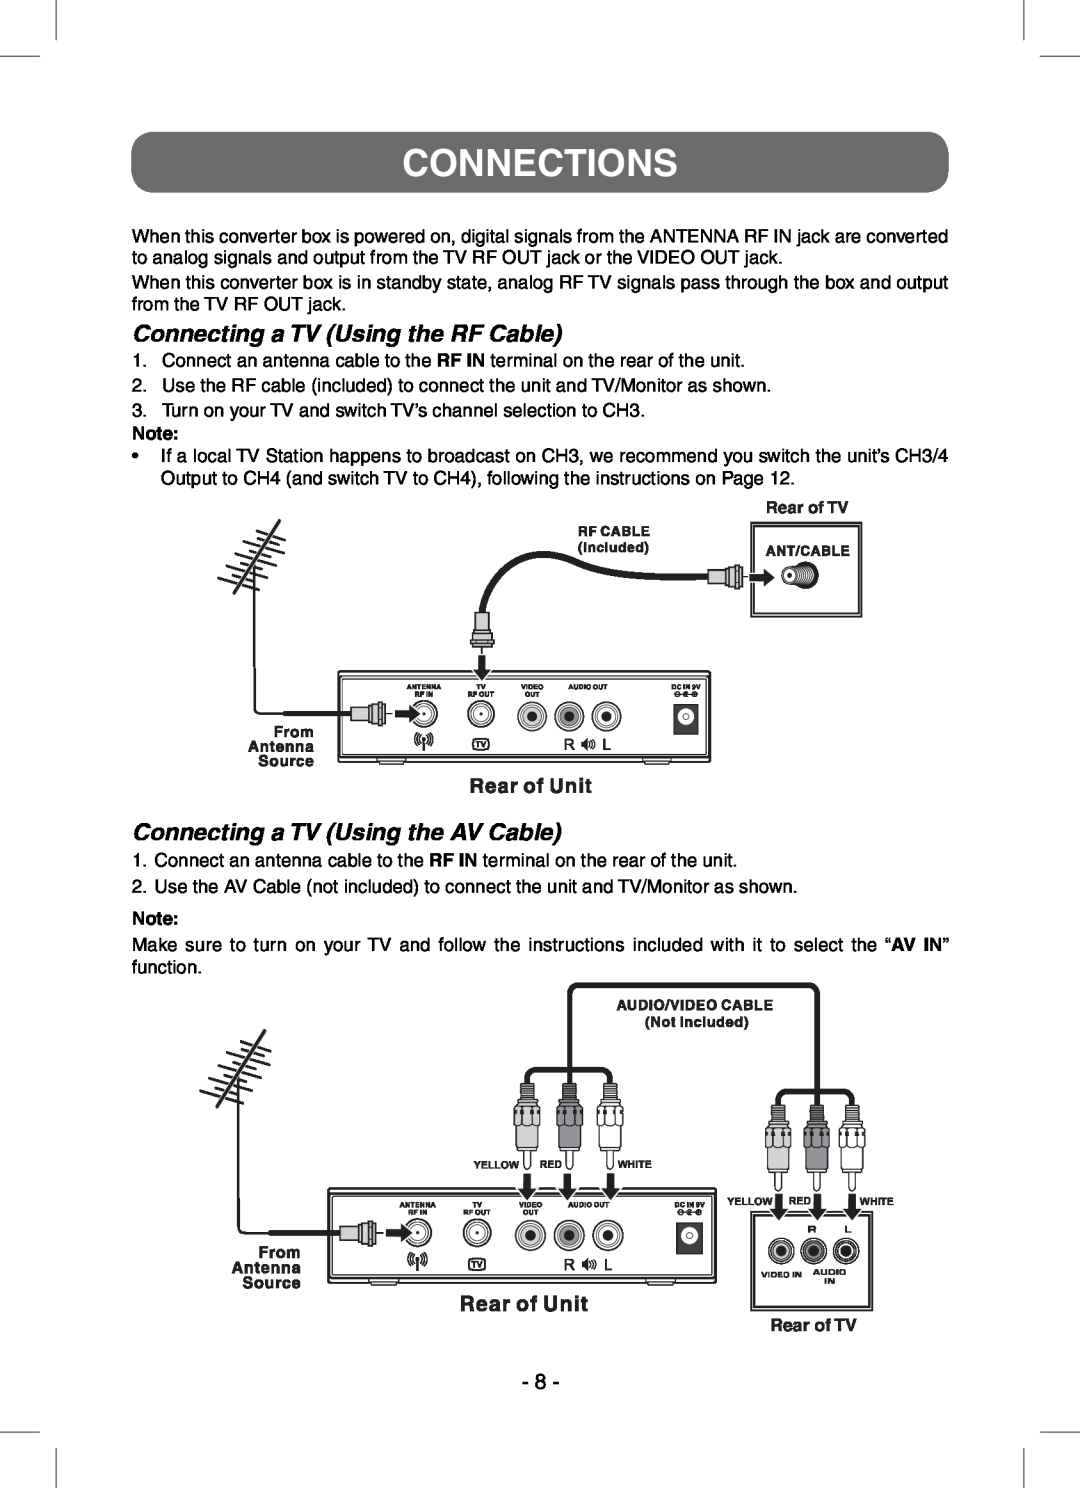 RCA STB7766C user manual Connections, Connecting a TV Using the RF Cable, Connecting a TV Using the AV Cable, Rear of TV 